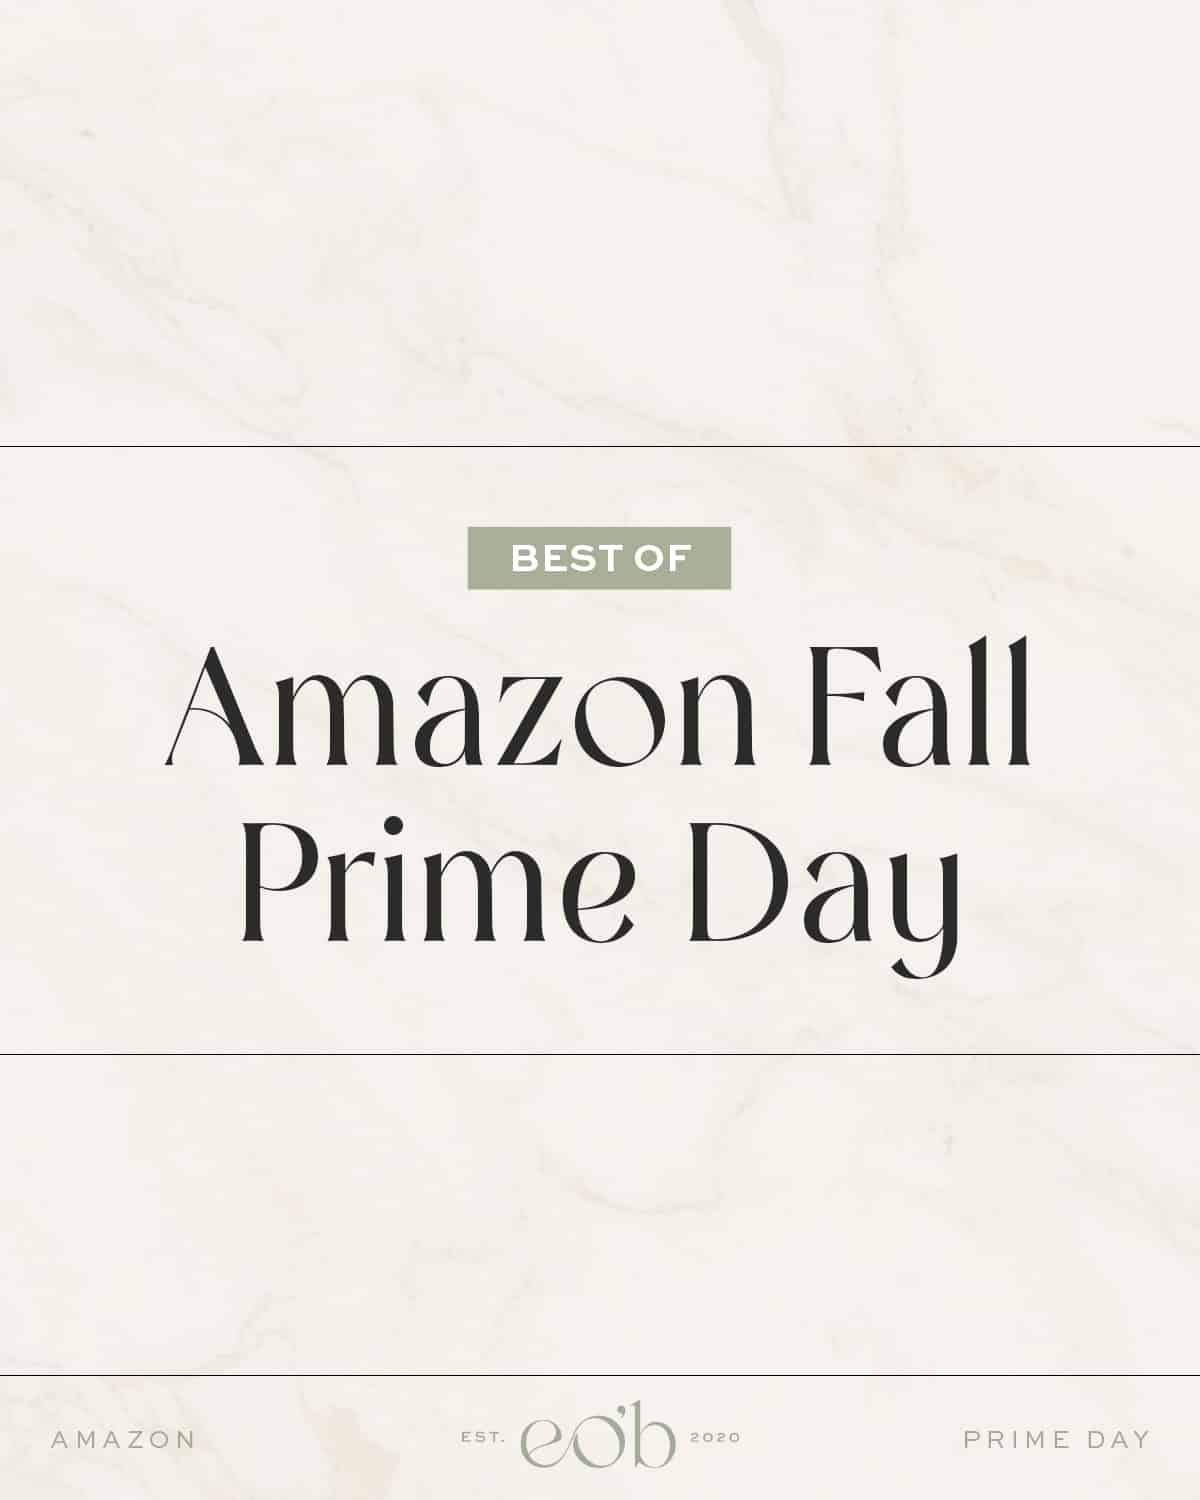 Best of Amazon Fall Prime Day